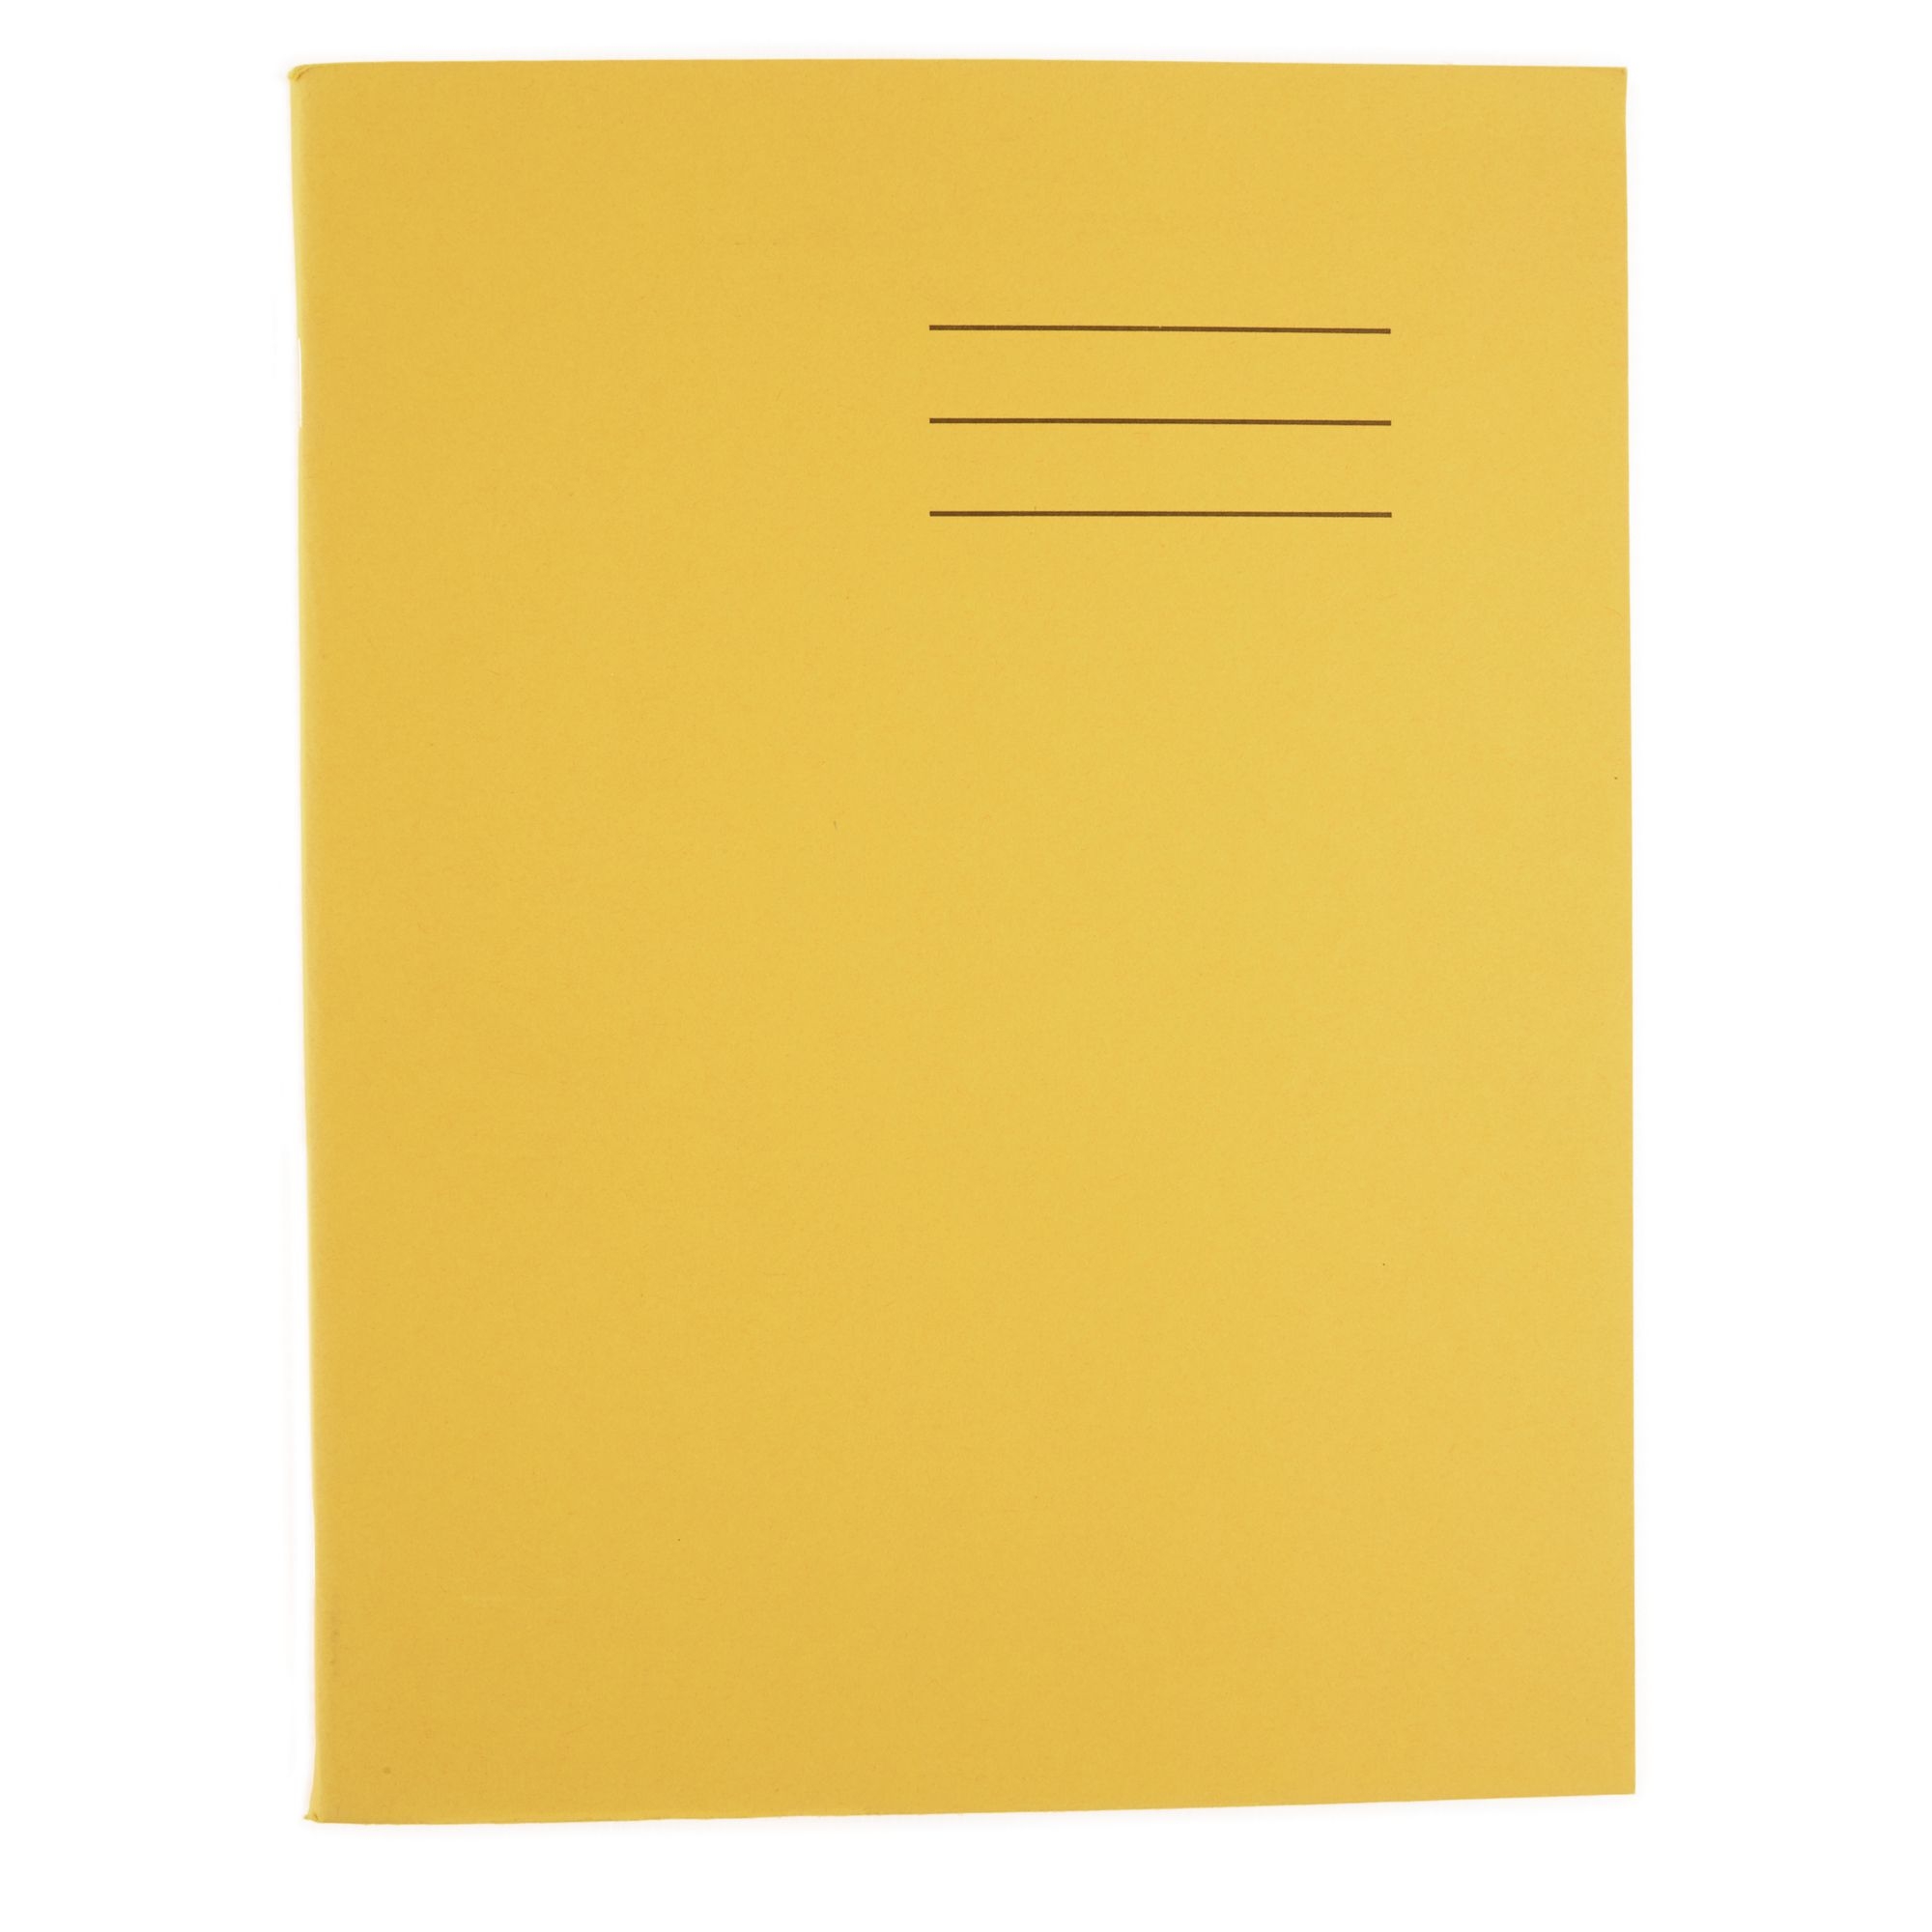 9x7 Exercise Book 48 Page, 8mm Ruled with Margin,Yellow - Pack of 100